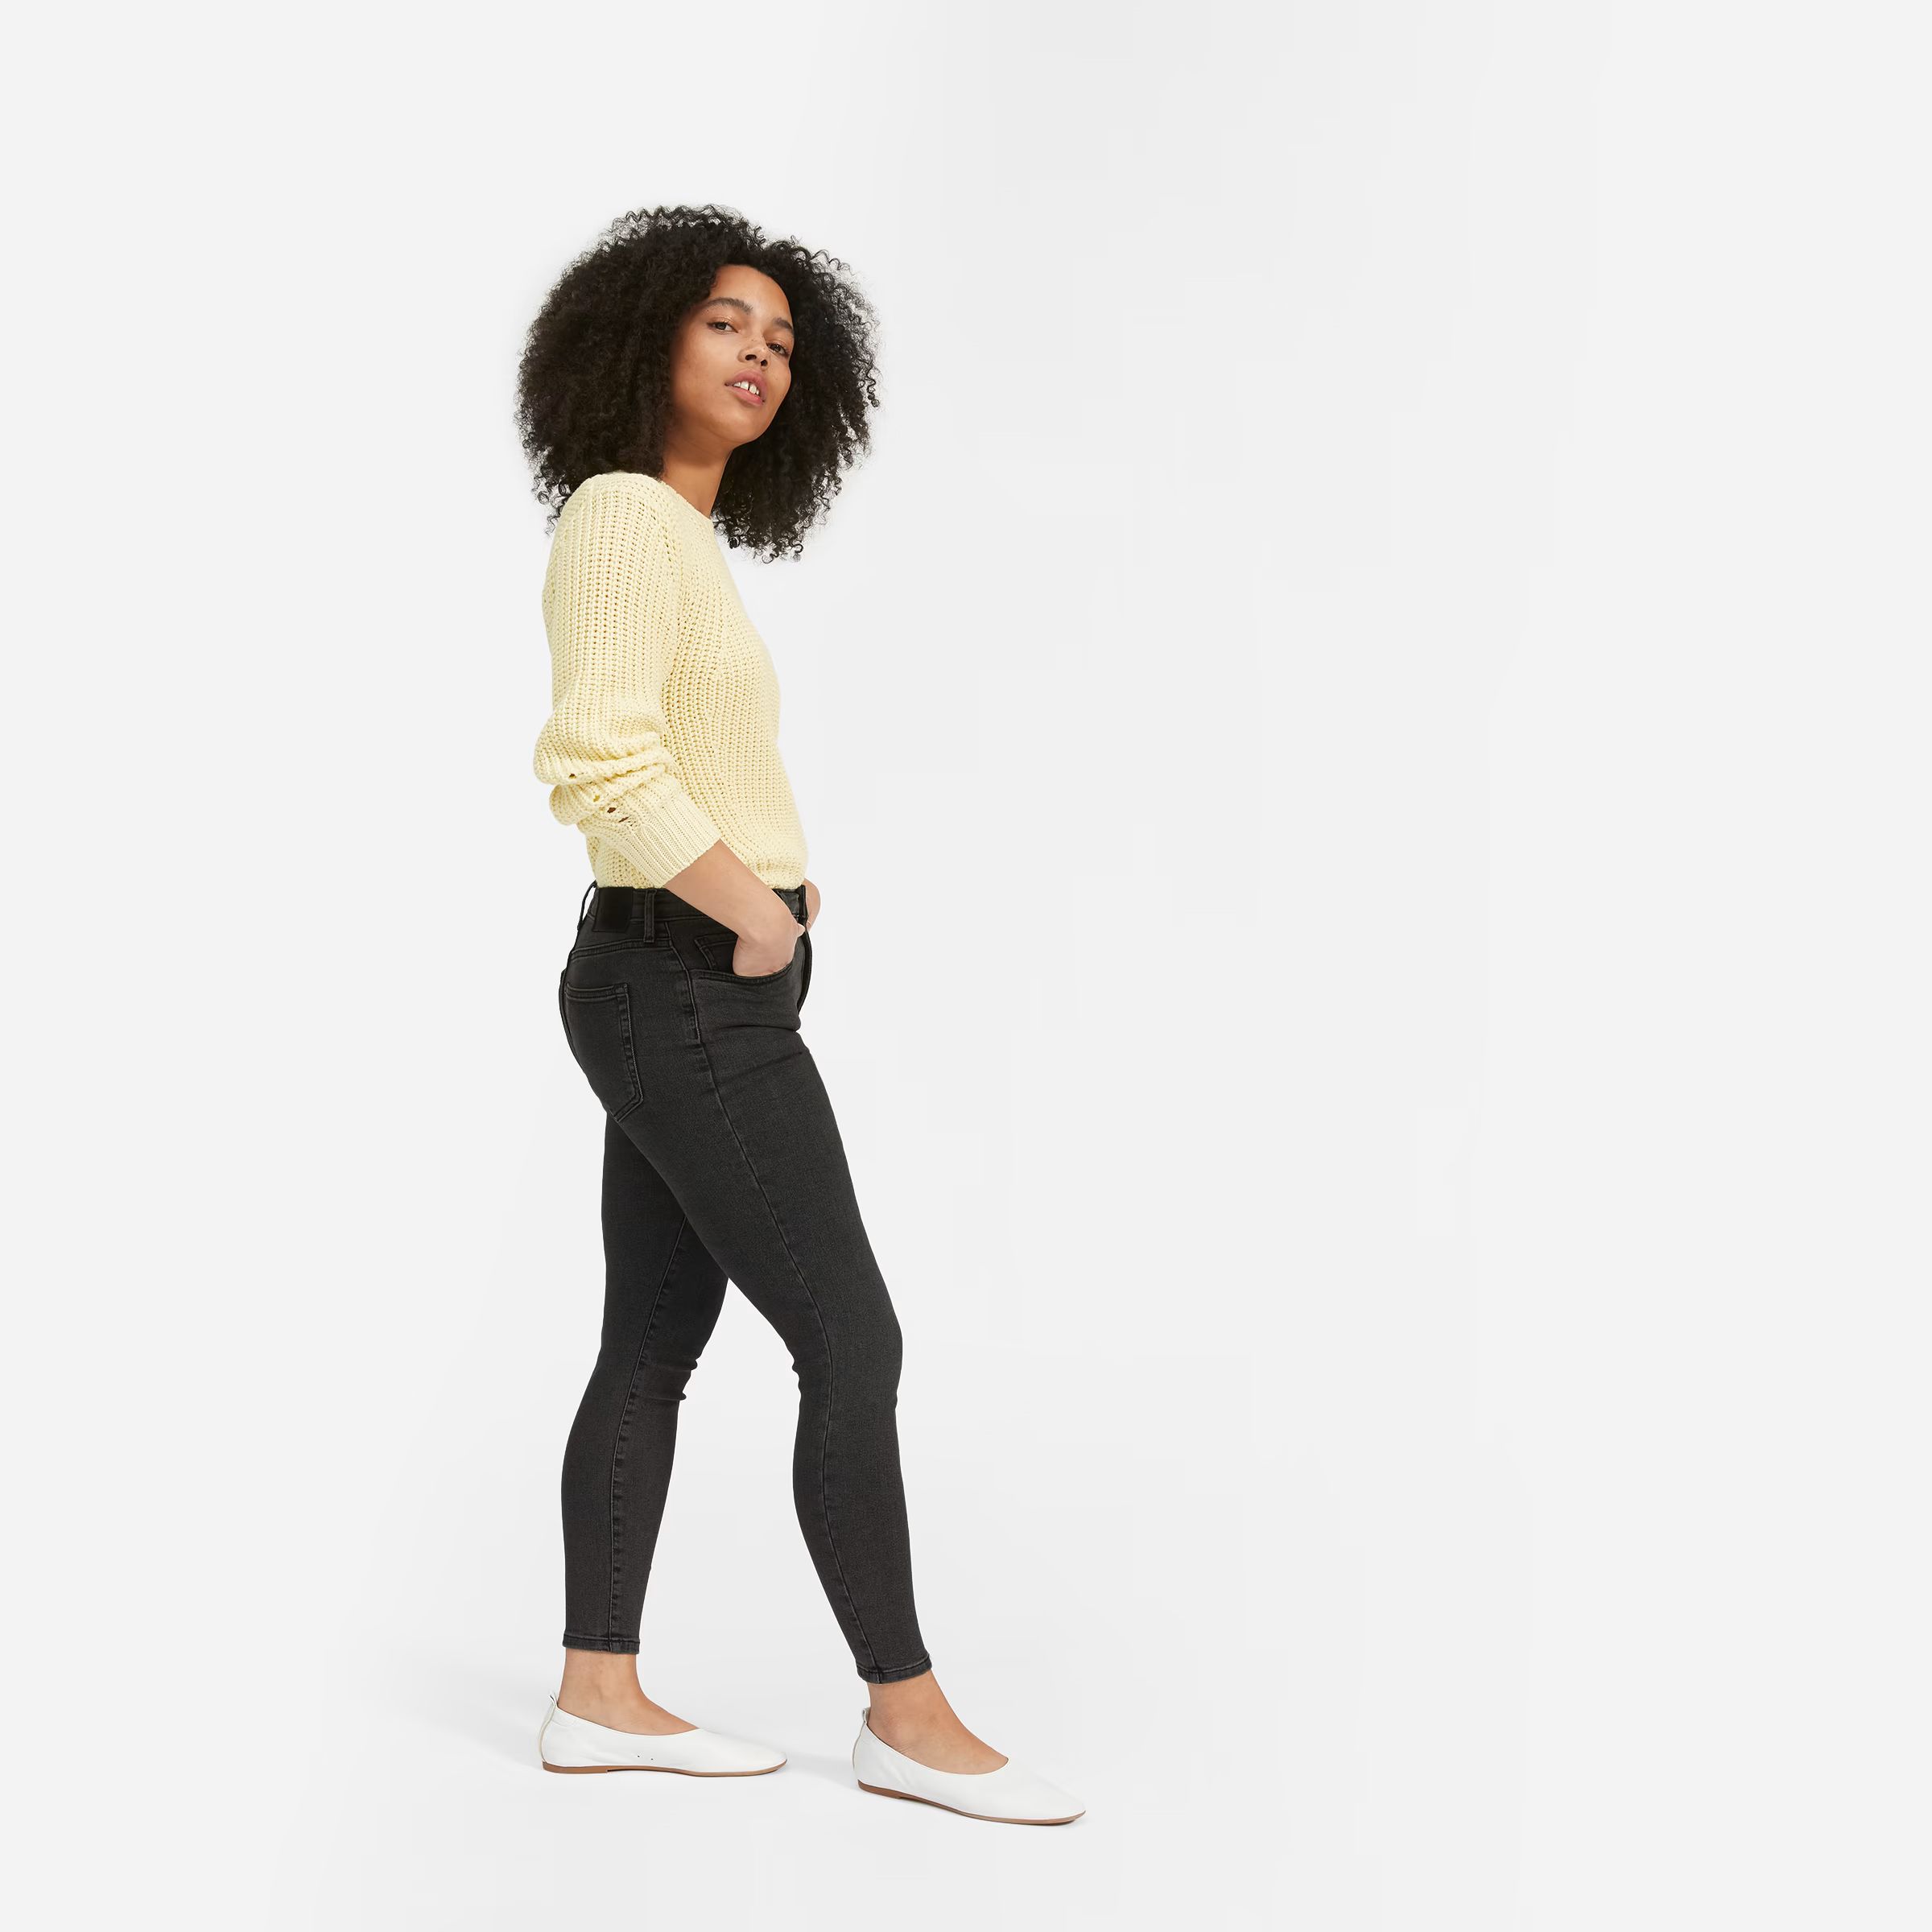 The Authentic Stretch High-Rise Skinny | Everlane